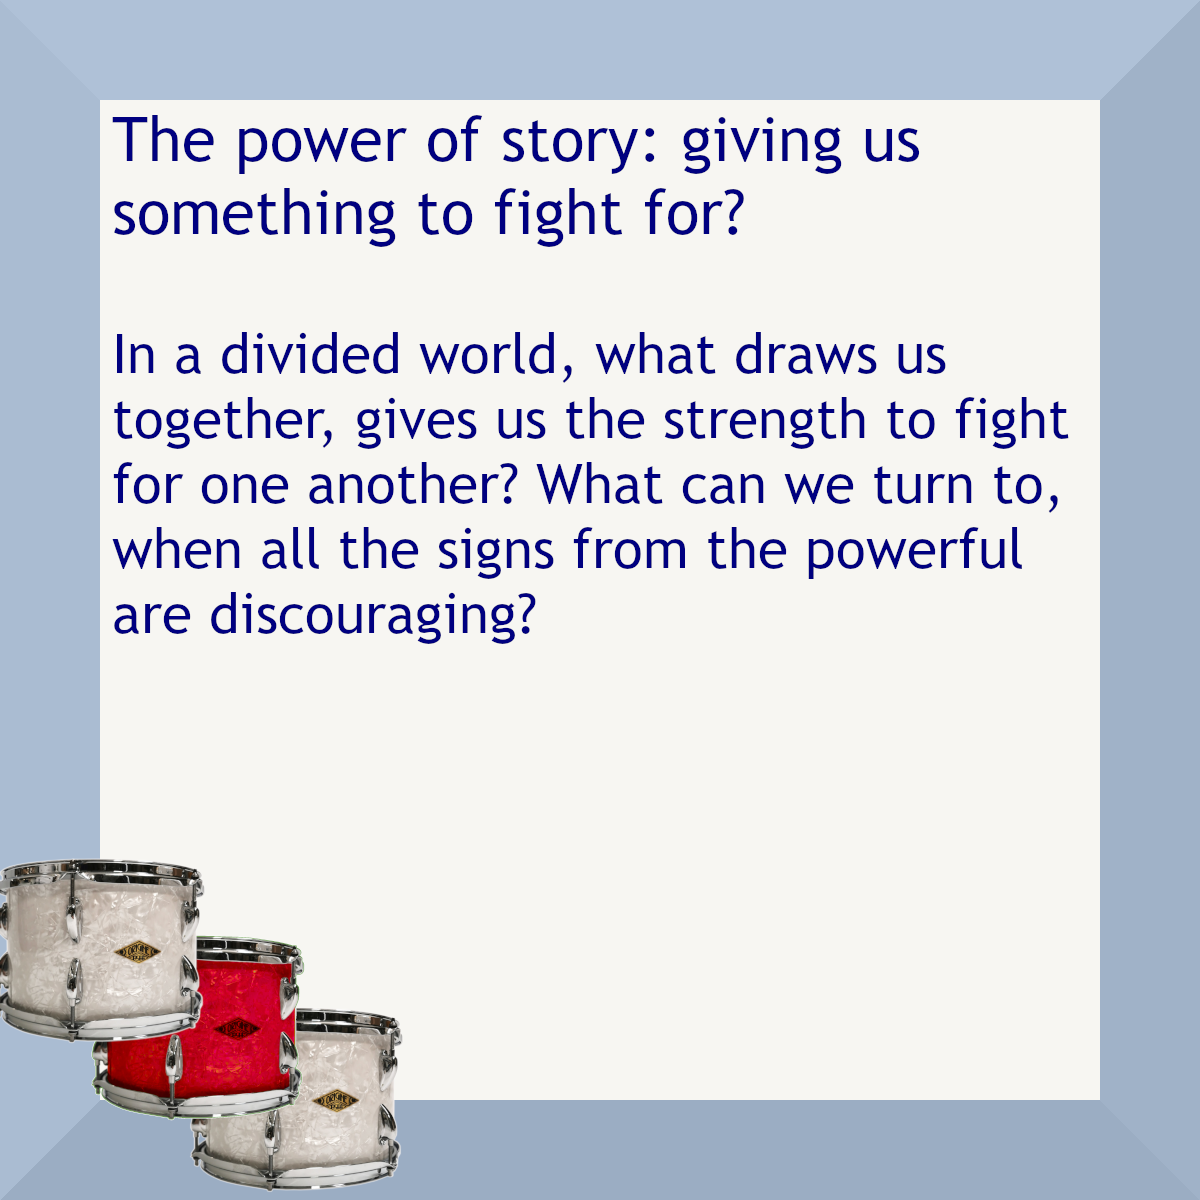 Blue border with three drums, one red. Text: The power of story: giving us something to fight for? In a divided world, what draws us together, gives us the strength to fight for one another? What can we turn to, when all signs from the powerful are discouraging?